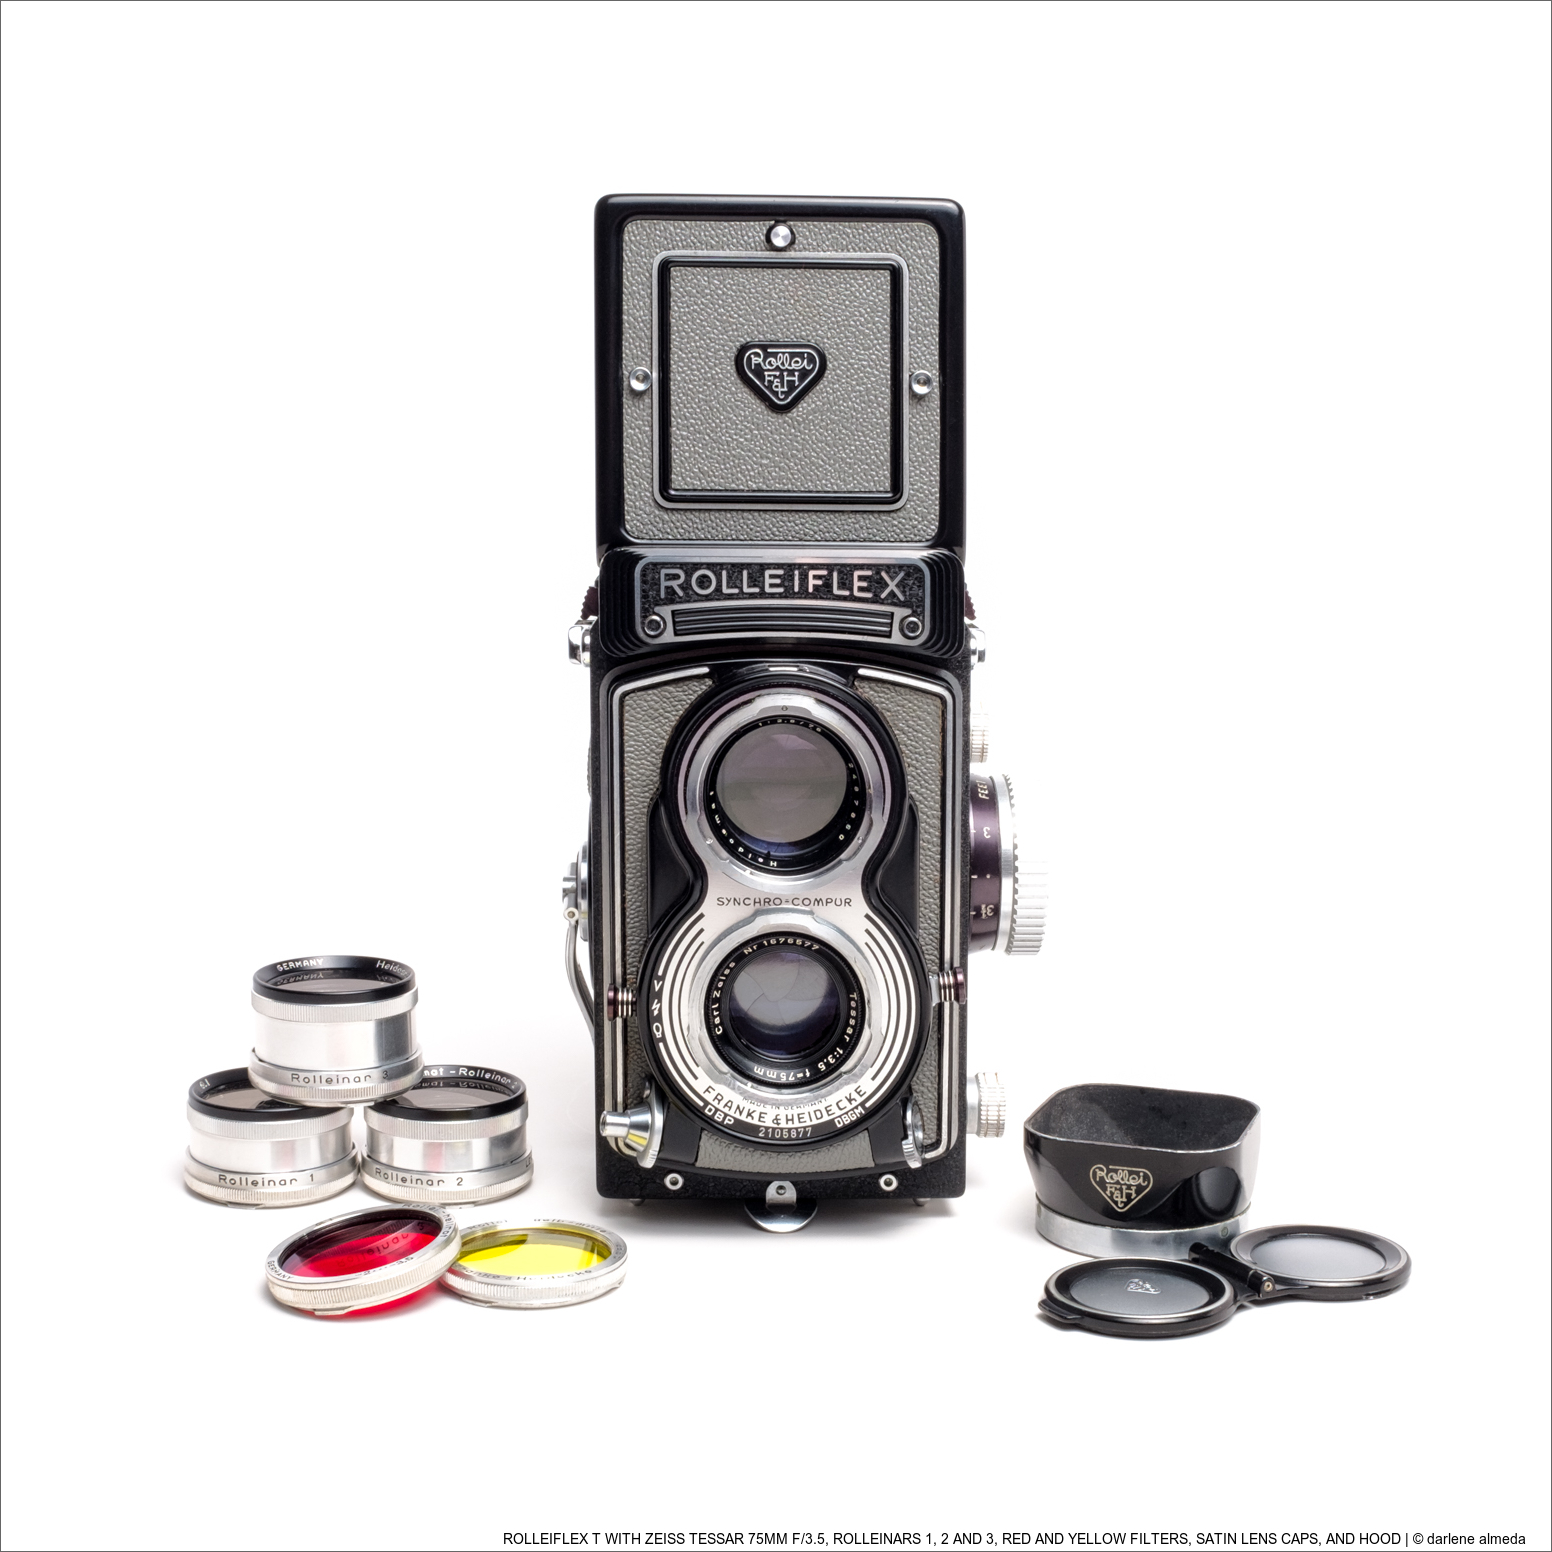 ROLLEIFLEX T WITH ZEISS TESSAR 75MM F/3.5, ROLLEINARS 1, 2 AND 3, RED AND YELLOW FILTERS, SATIN LENS CAPS, AND HOOD